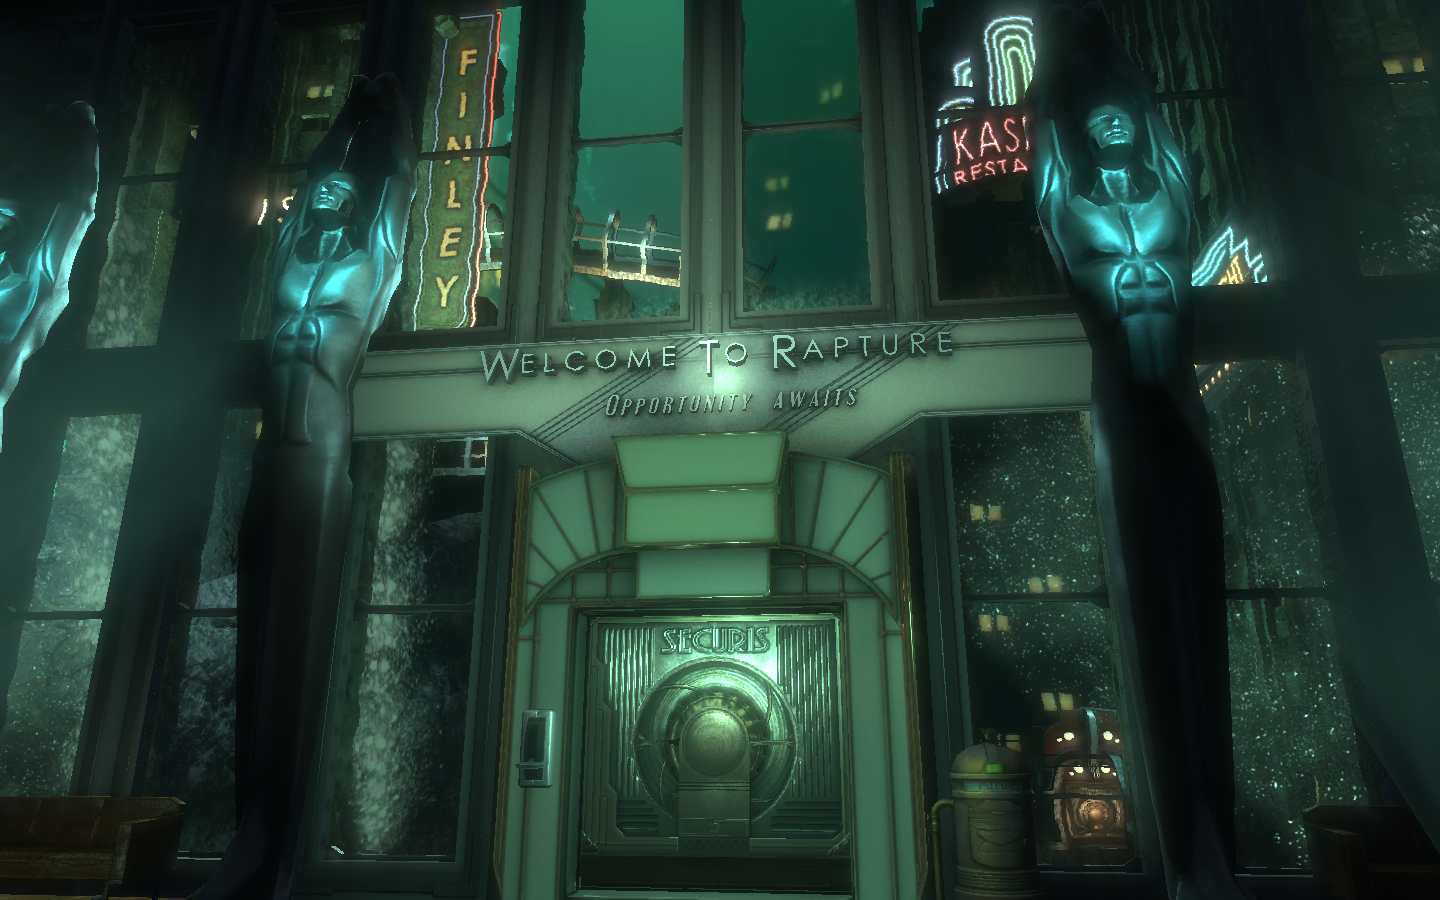 BioShock the Collection